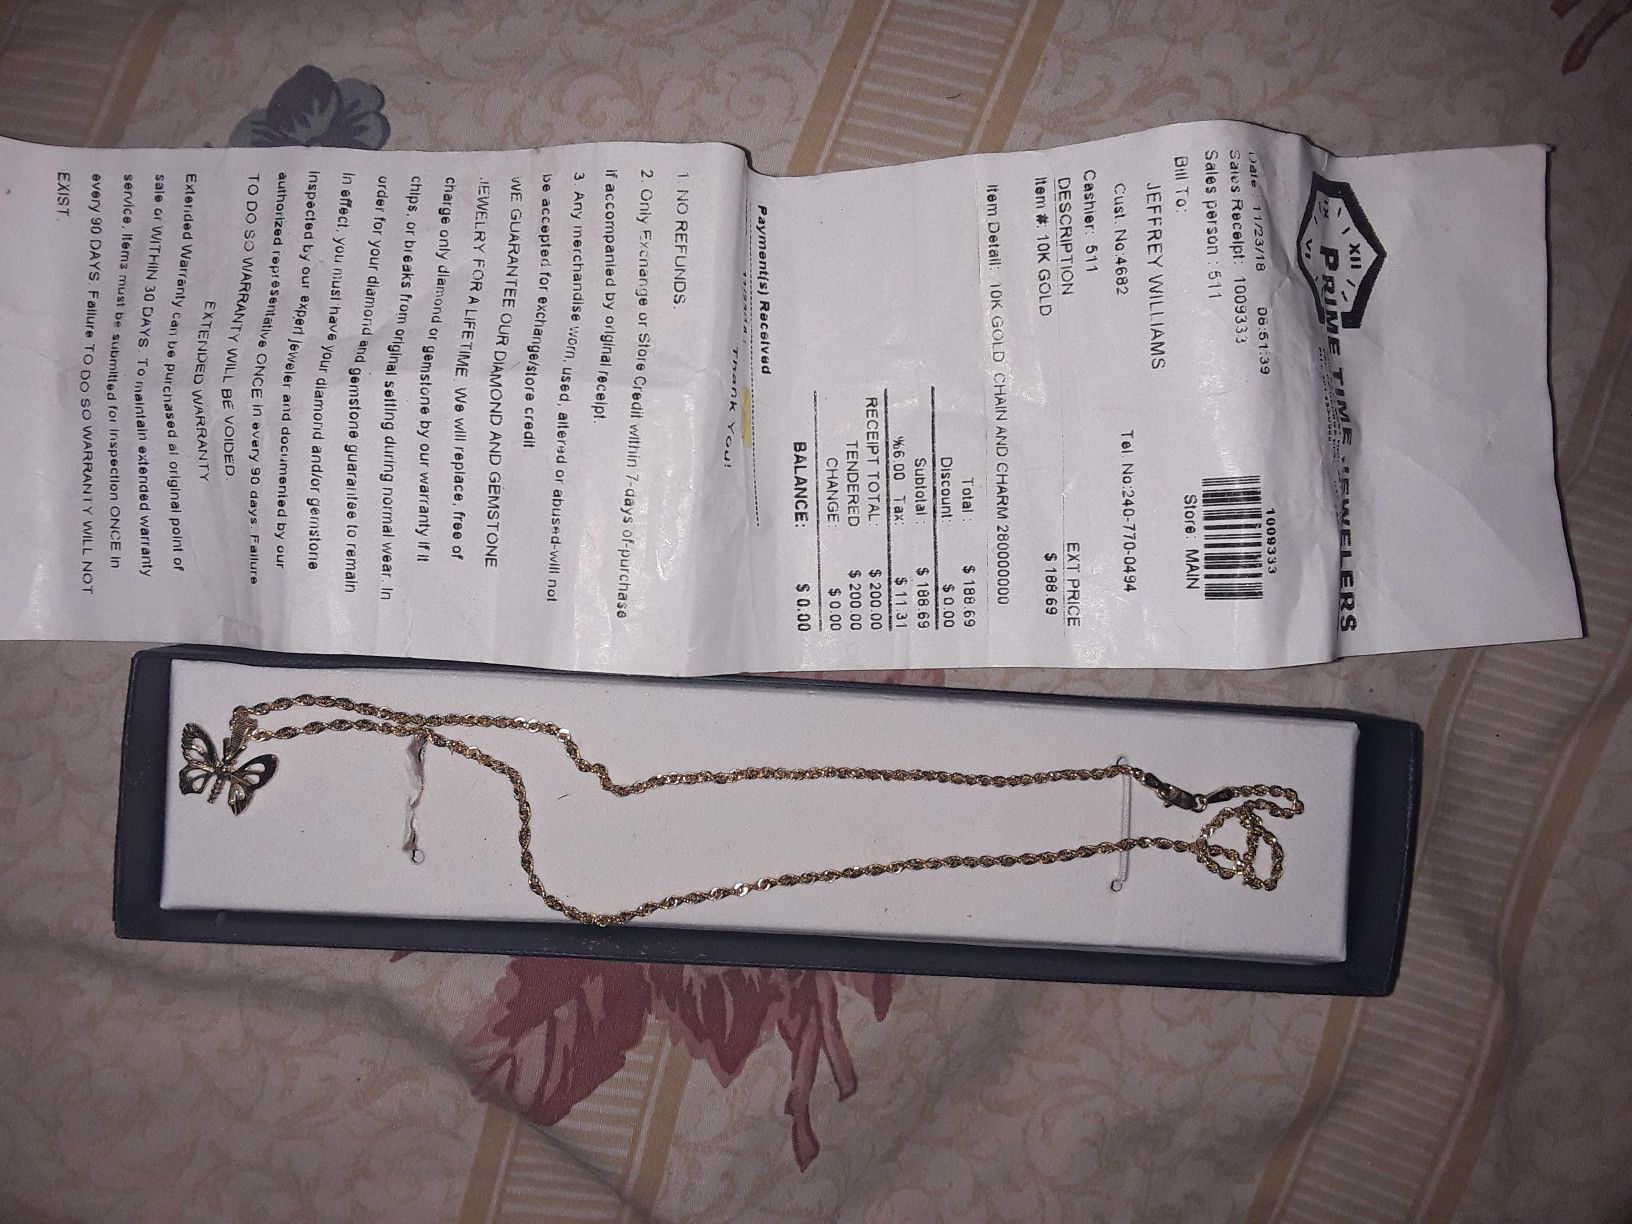 10K Gold Necklace and Charm